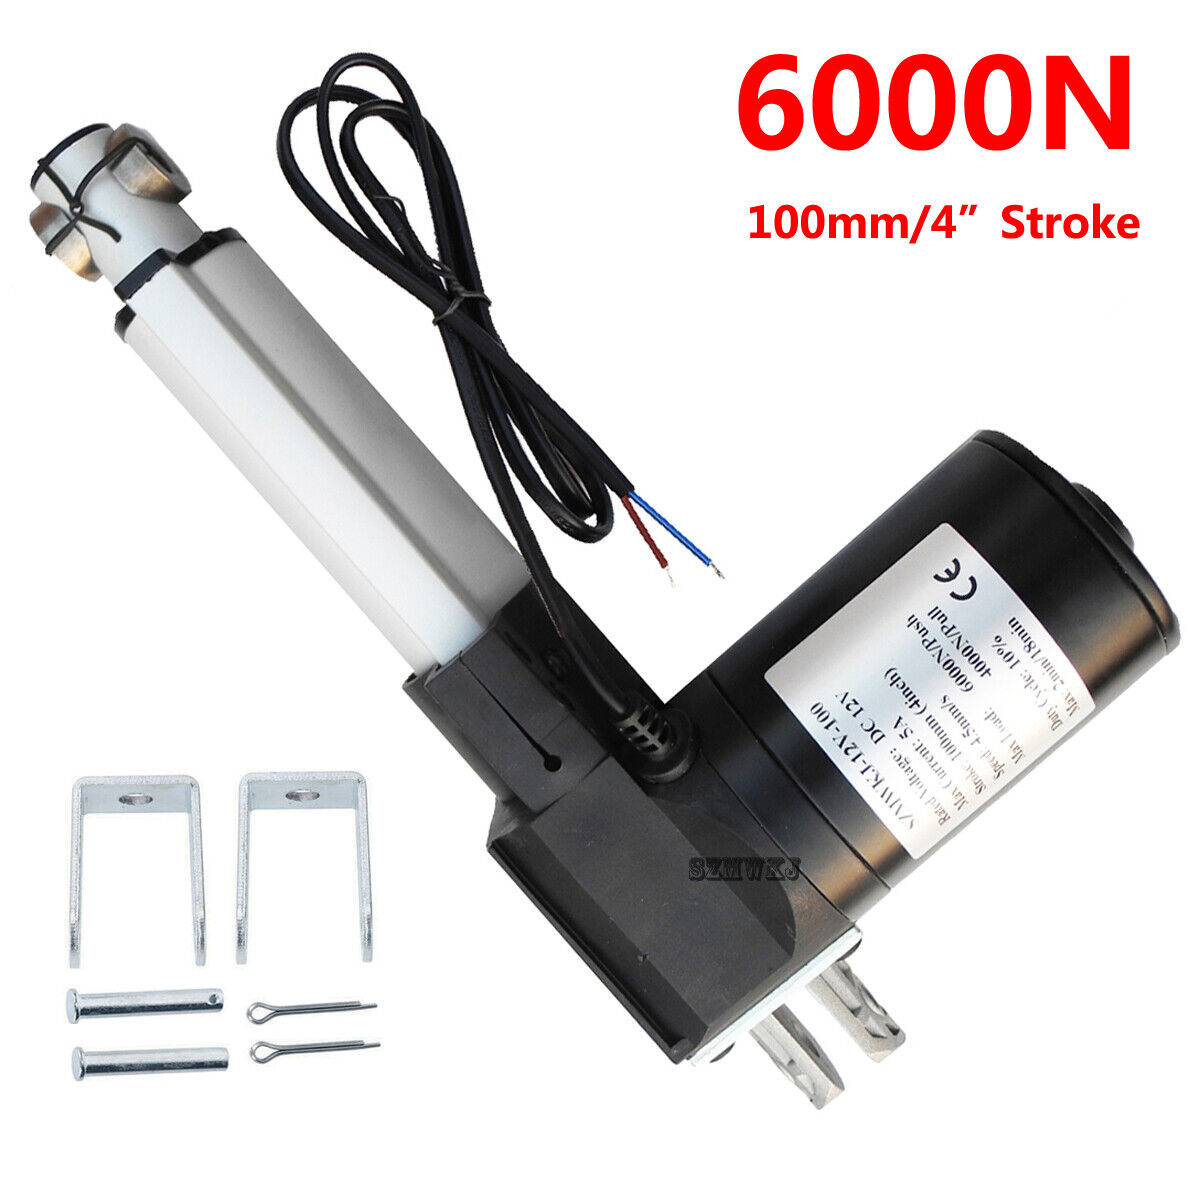 12V 6000N Electric Linear Actuator Motor W/ Brackets for Auto Car Door Opener CL